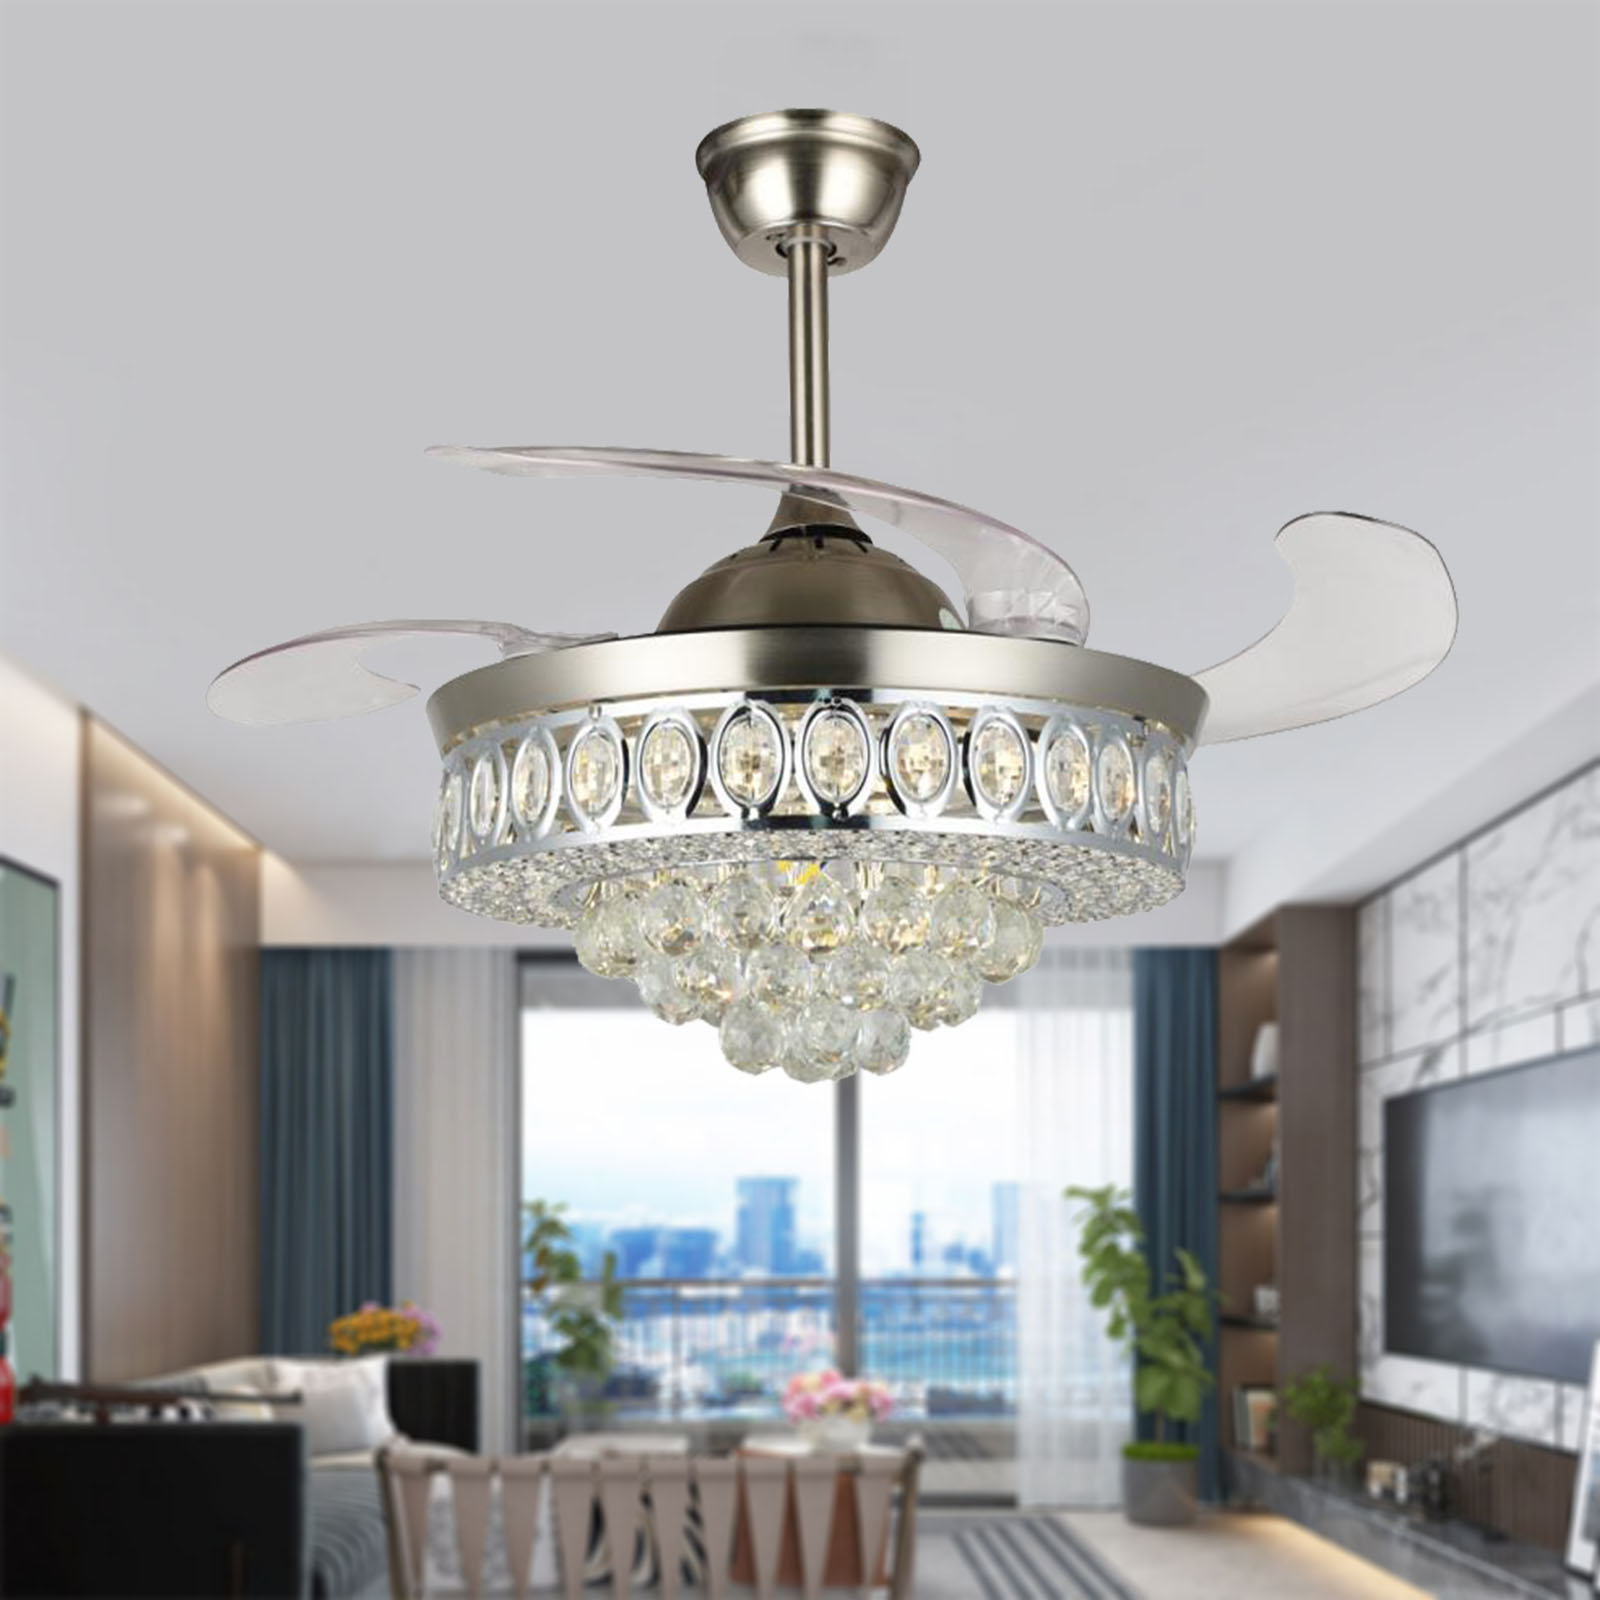 42"Silver Luxury Crystal LED Chandelier Remote Invisible Blade Ceiling Fan Light 